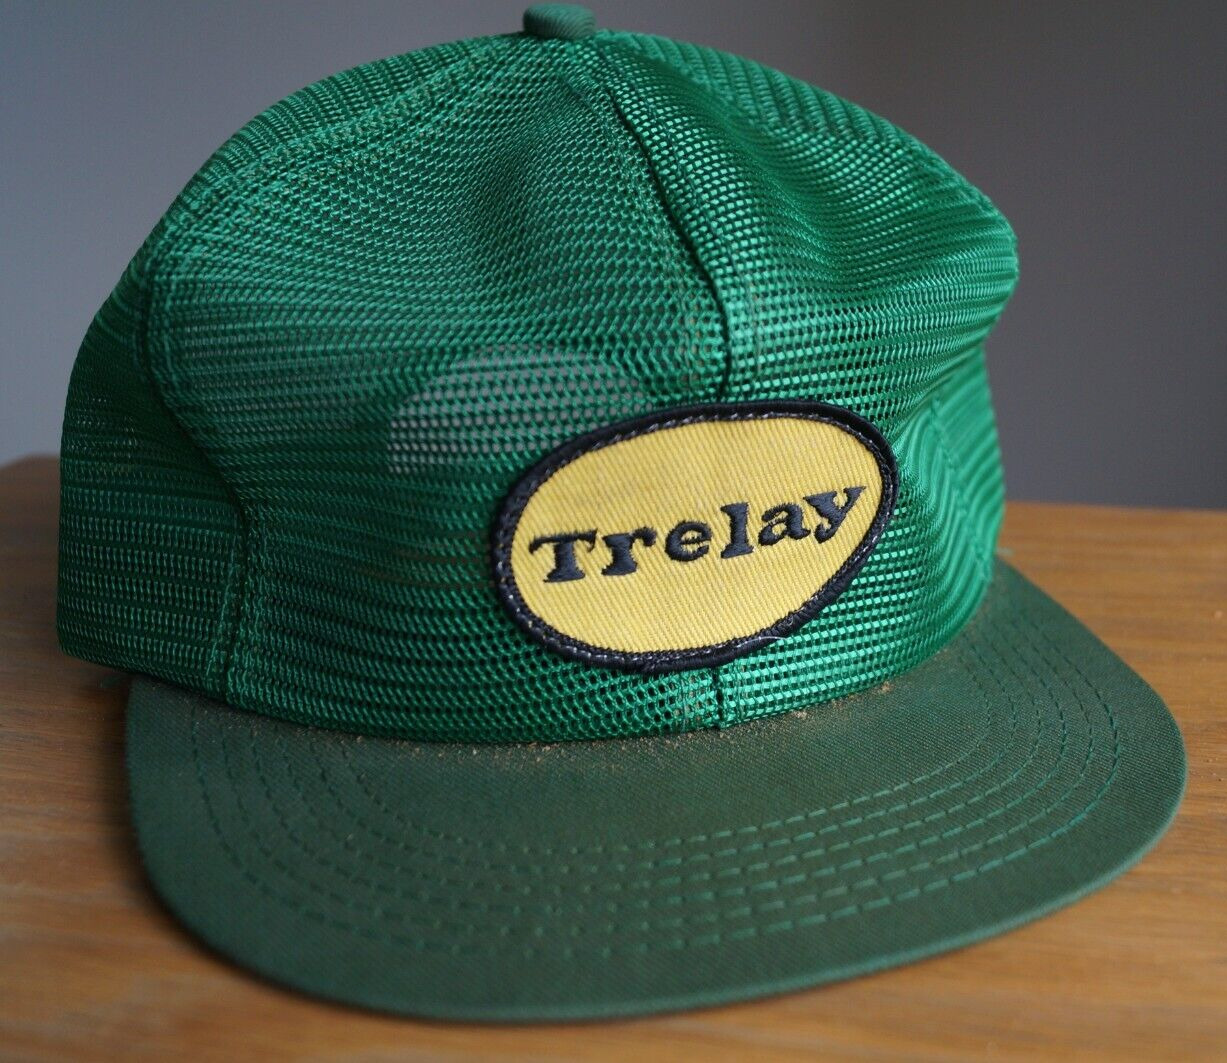 Trelay Patch Snapback Hat Vintage Mesh K-Brand Green Farming Agriculture USA(L2)